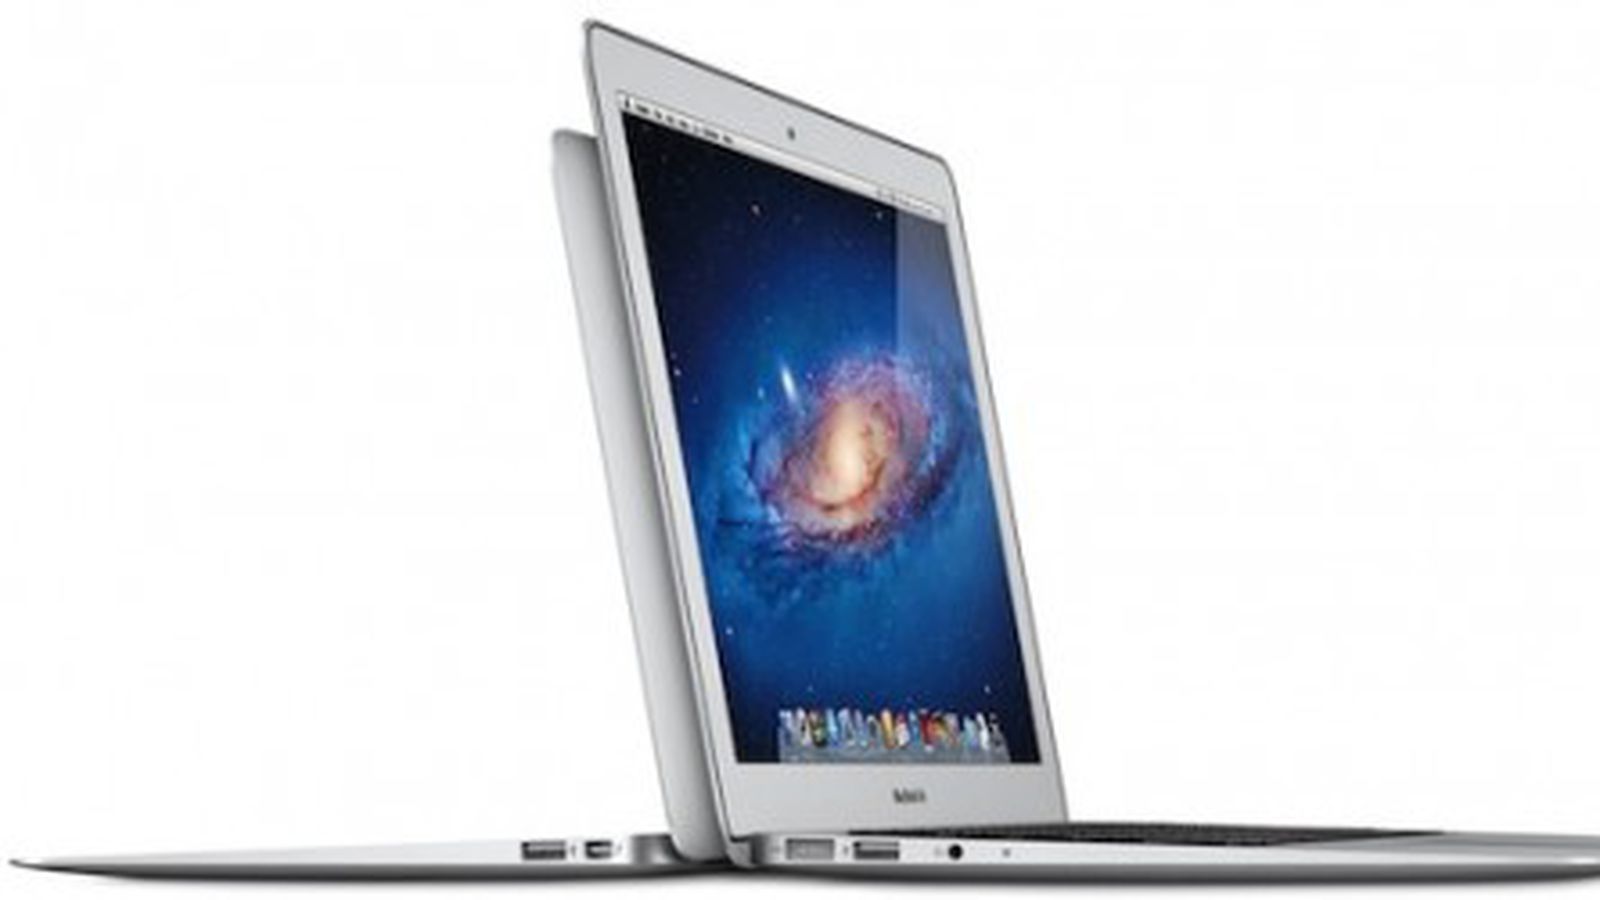 MacBook Air Upgrades Said to Include Up to 8 GB RAM and 512 GB